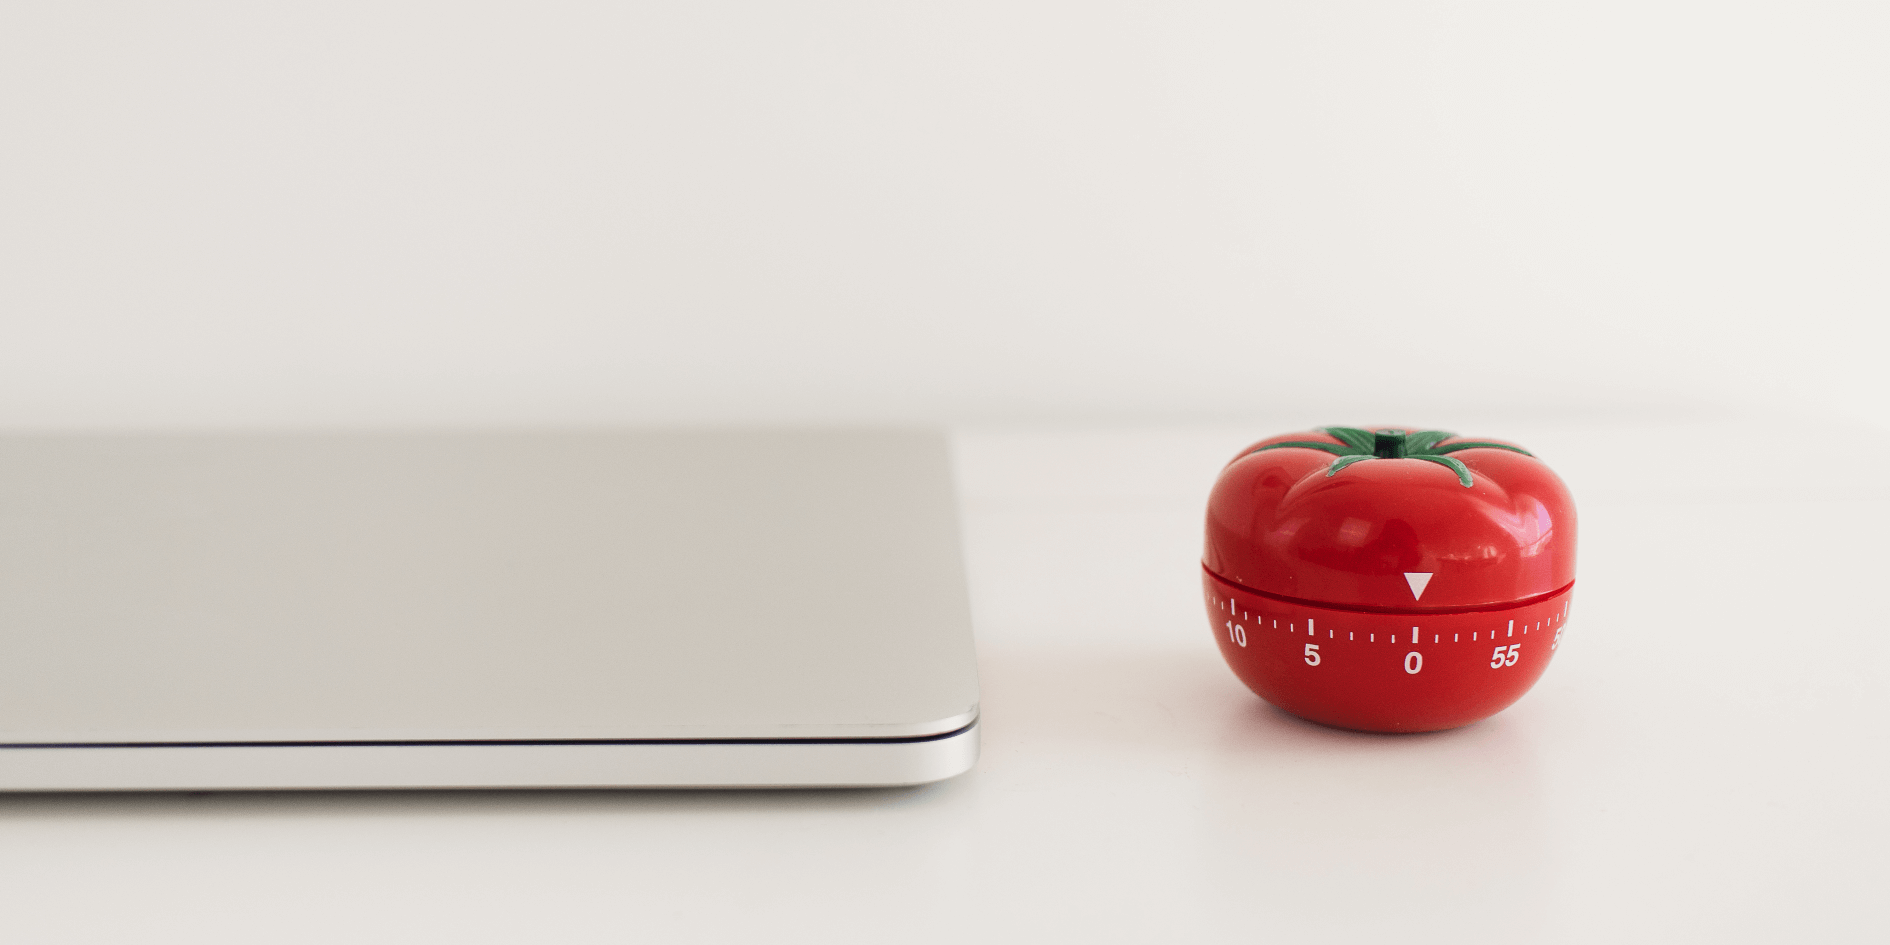 Mastering Time Management: Top Pomodoro Apps